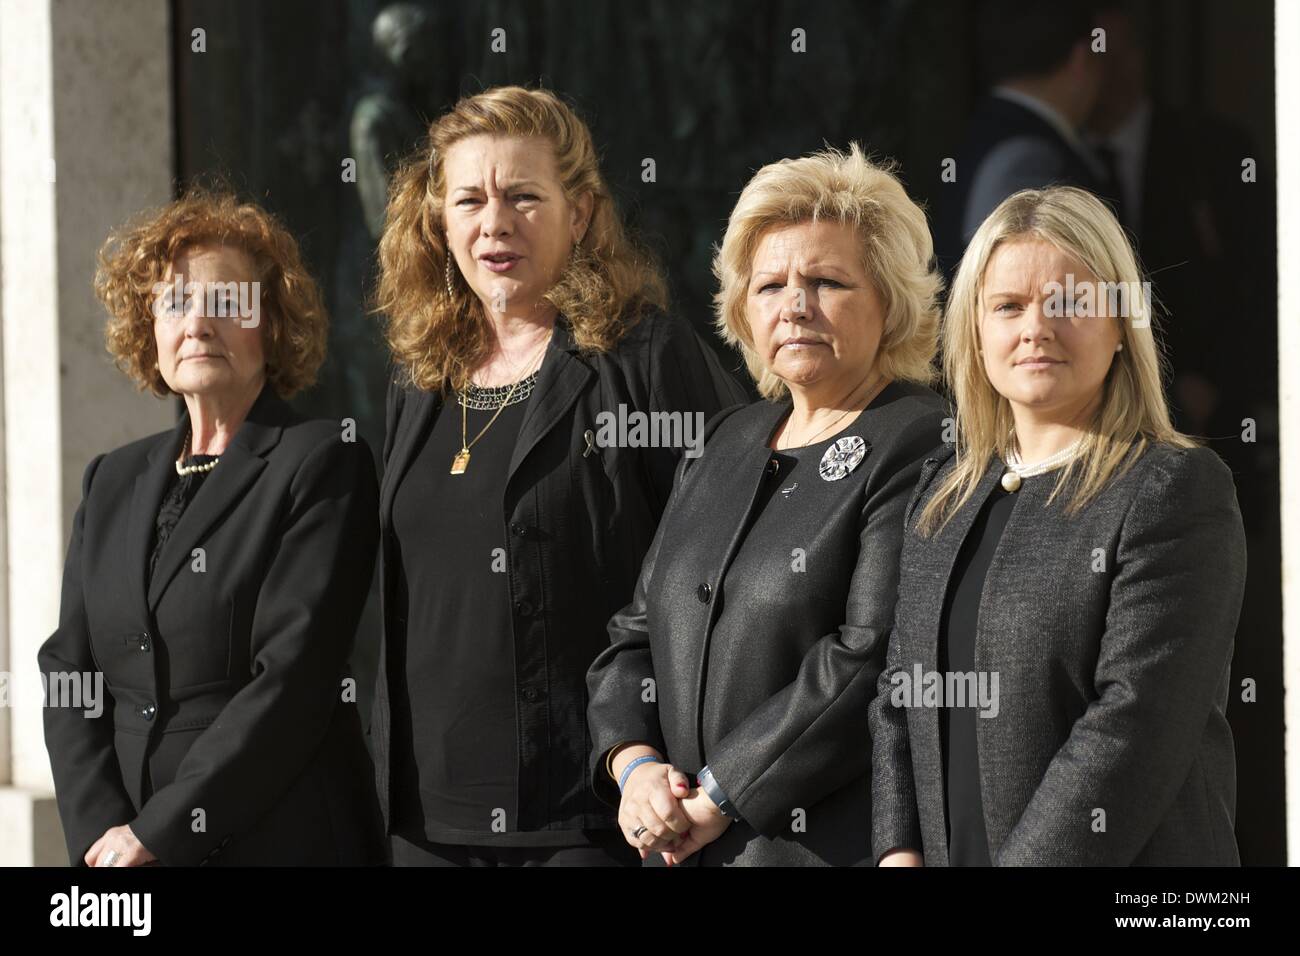 Madrid, Spain. 11th Mar, 2014. Angeles Dominguez, Pilar Manjon, Angeles Pedraza and Maria del Mar Blanco attend Solemn Mass honoring and remembering the victims of the 10th annivrsary of the terrorist attacks of March 11, 2004 at Almudena Cathedral on March 11, 2014 in Madrid Credit:  Jack Abuin/ZUMAPRESS.com/Alamy Live News Stock Photo